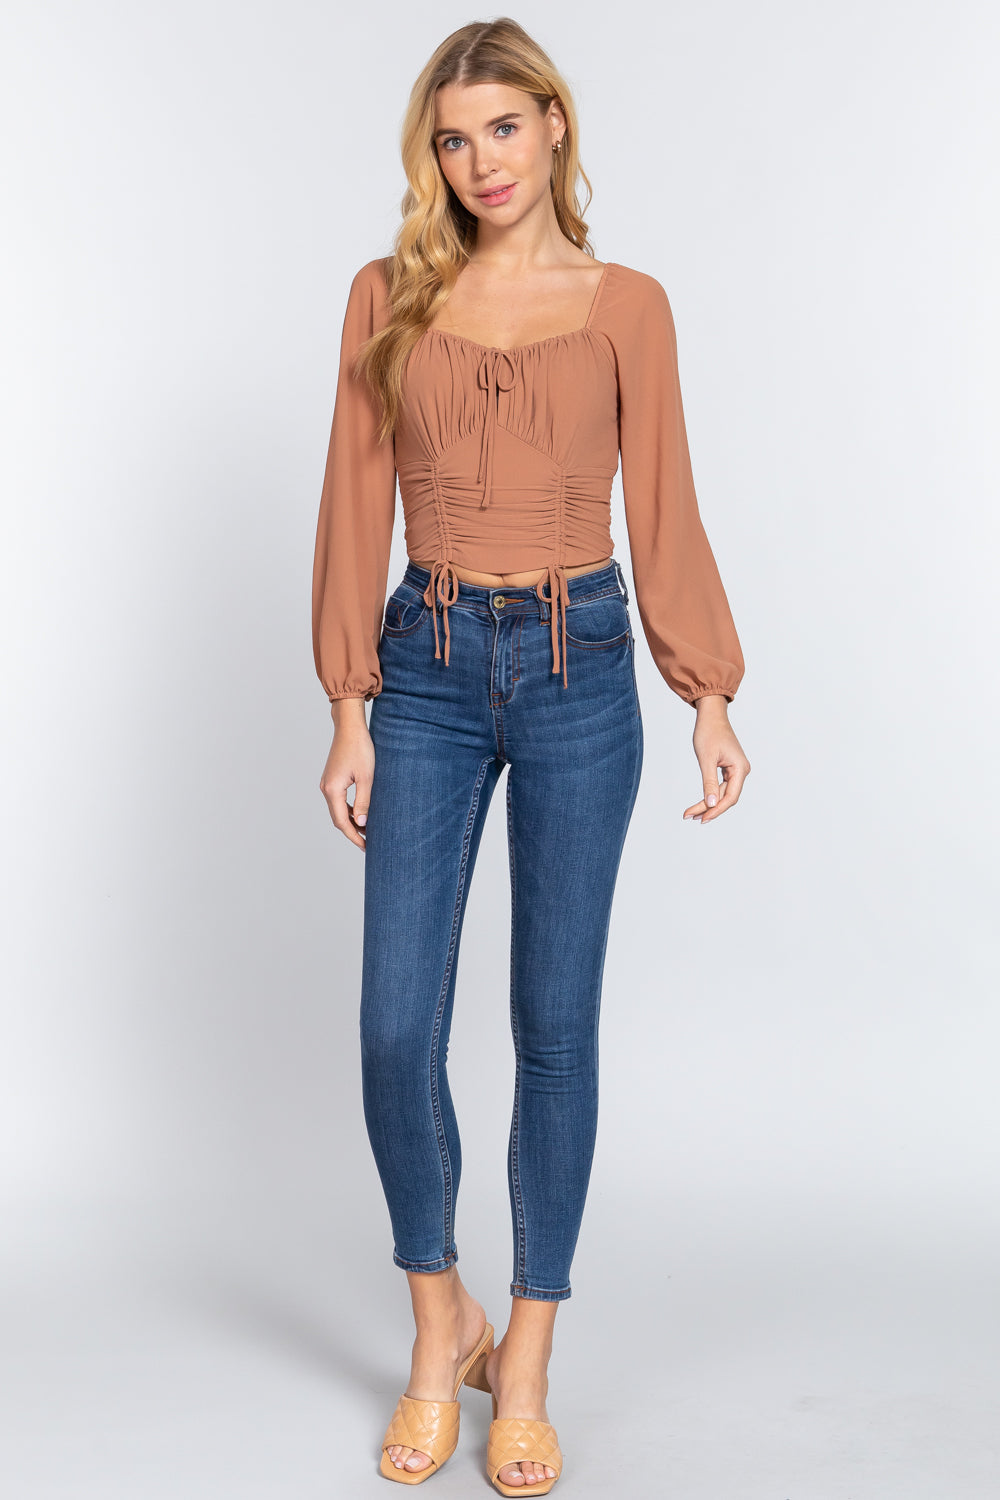 Rust Front Tied Ruched Detail Long Sleeve Top - women's crop top at TFC&H Co.